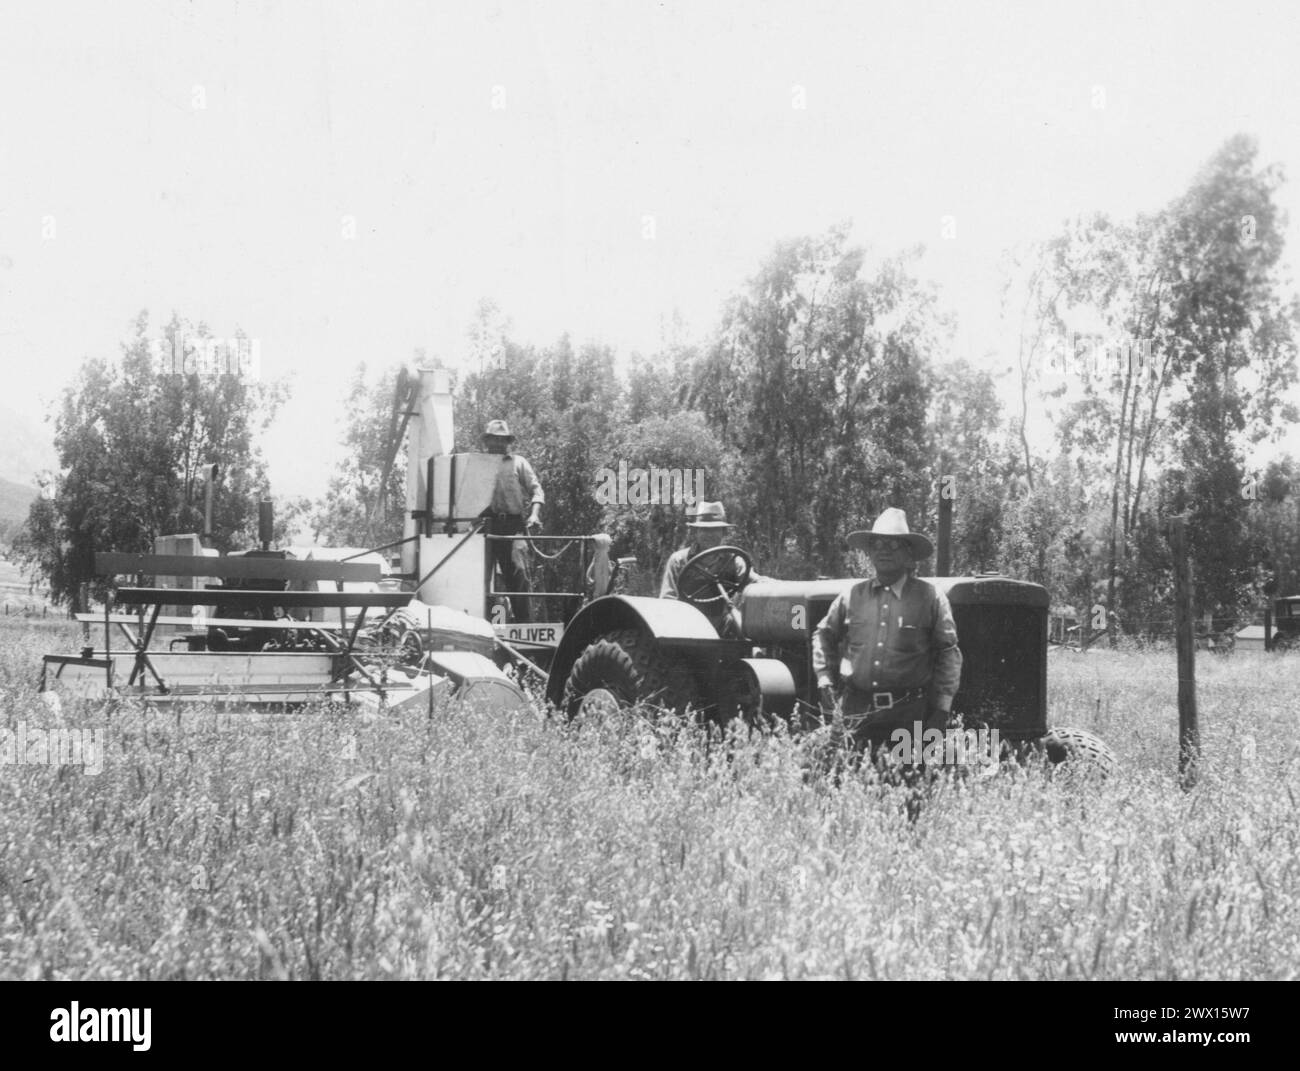 Original caption: 'Harvester and tractor belonging to the Barona Group of Indians, Lakeside, California. The grain in the foreground is mostly oats, with some scattering wheat. June 1937.' Stock Photo